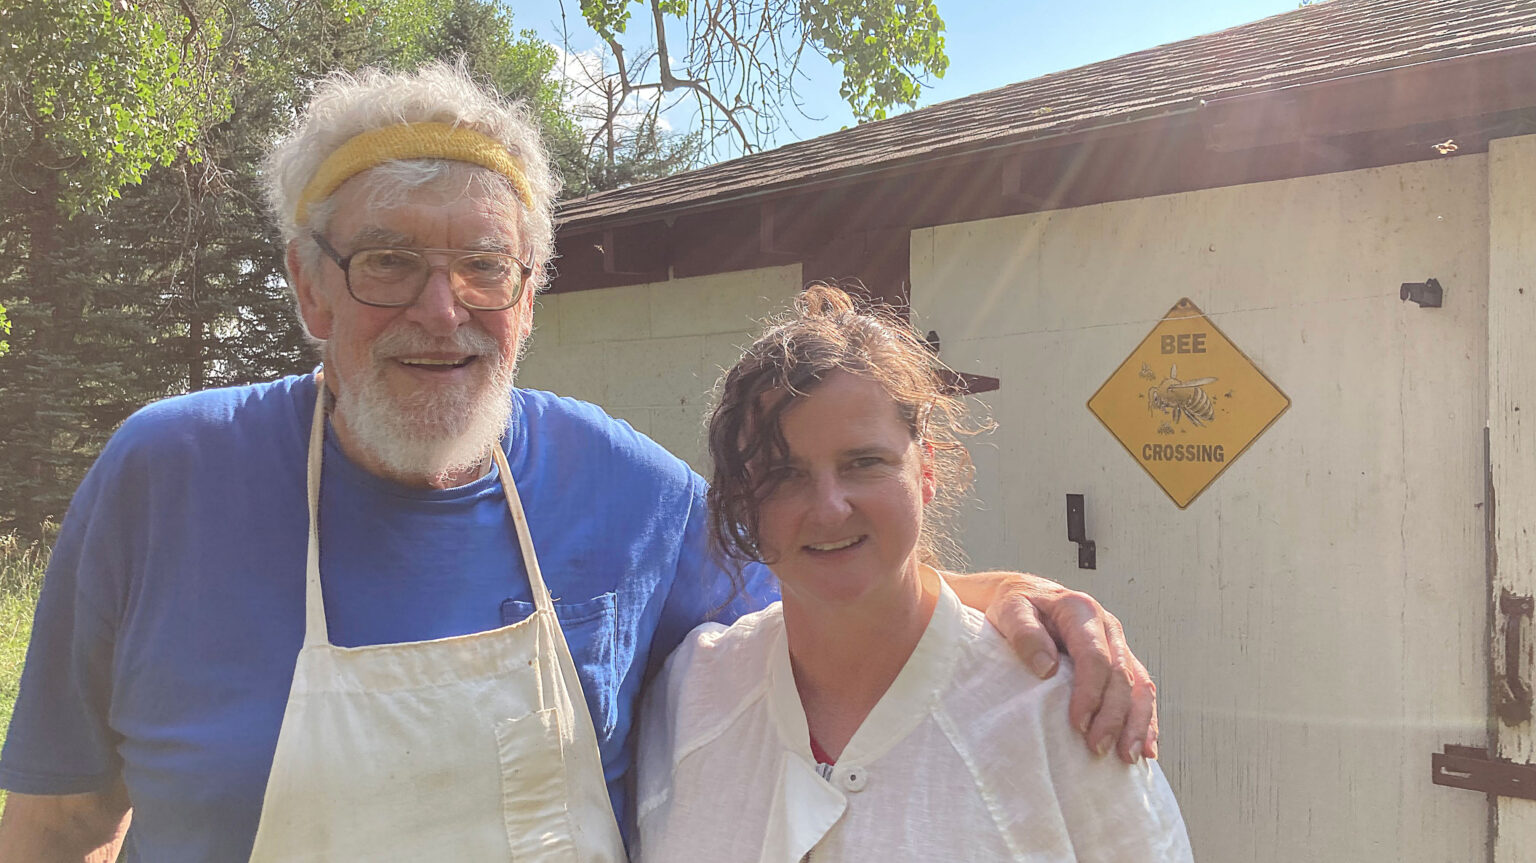 Tom and Laura standing outside the Honey House, Boulder County, Colorado, August 2021